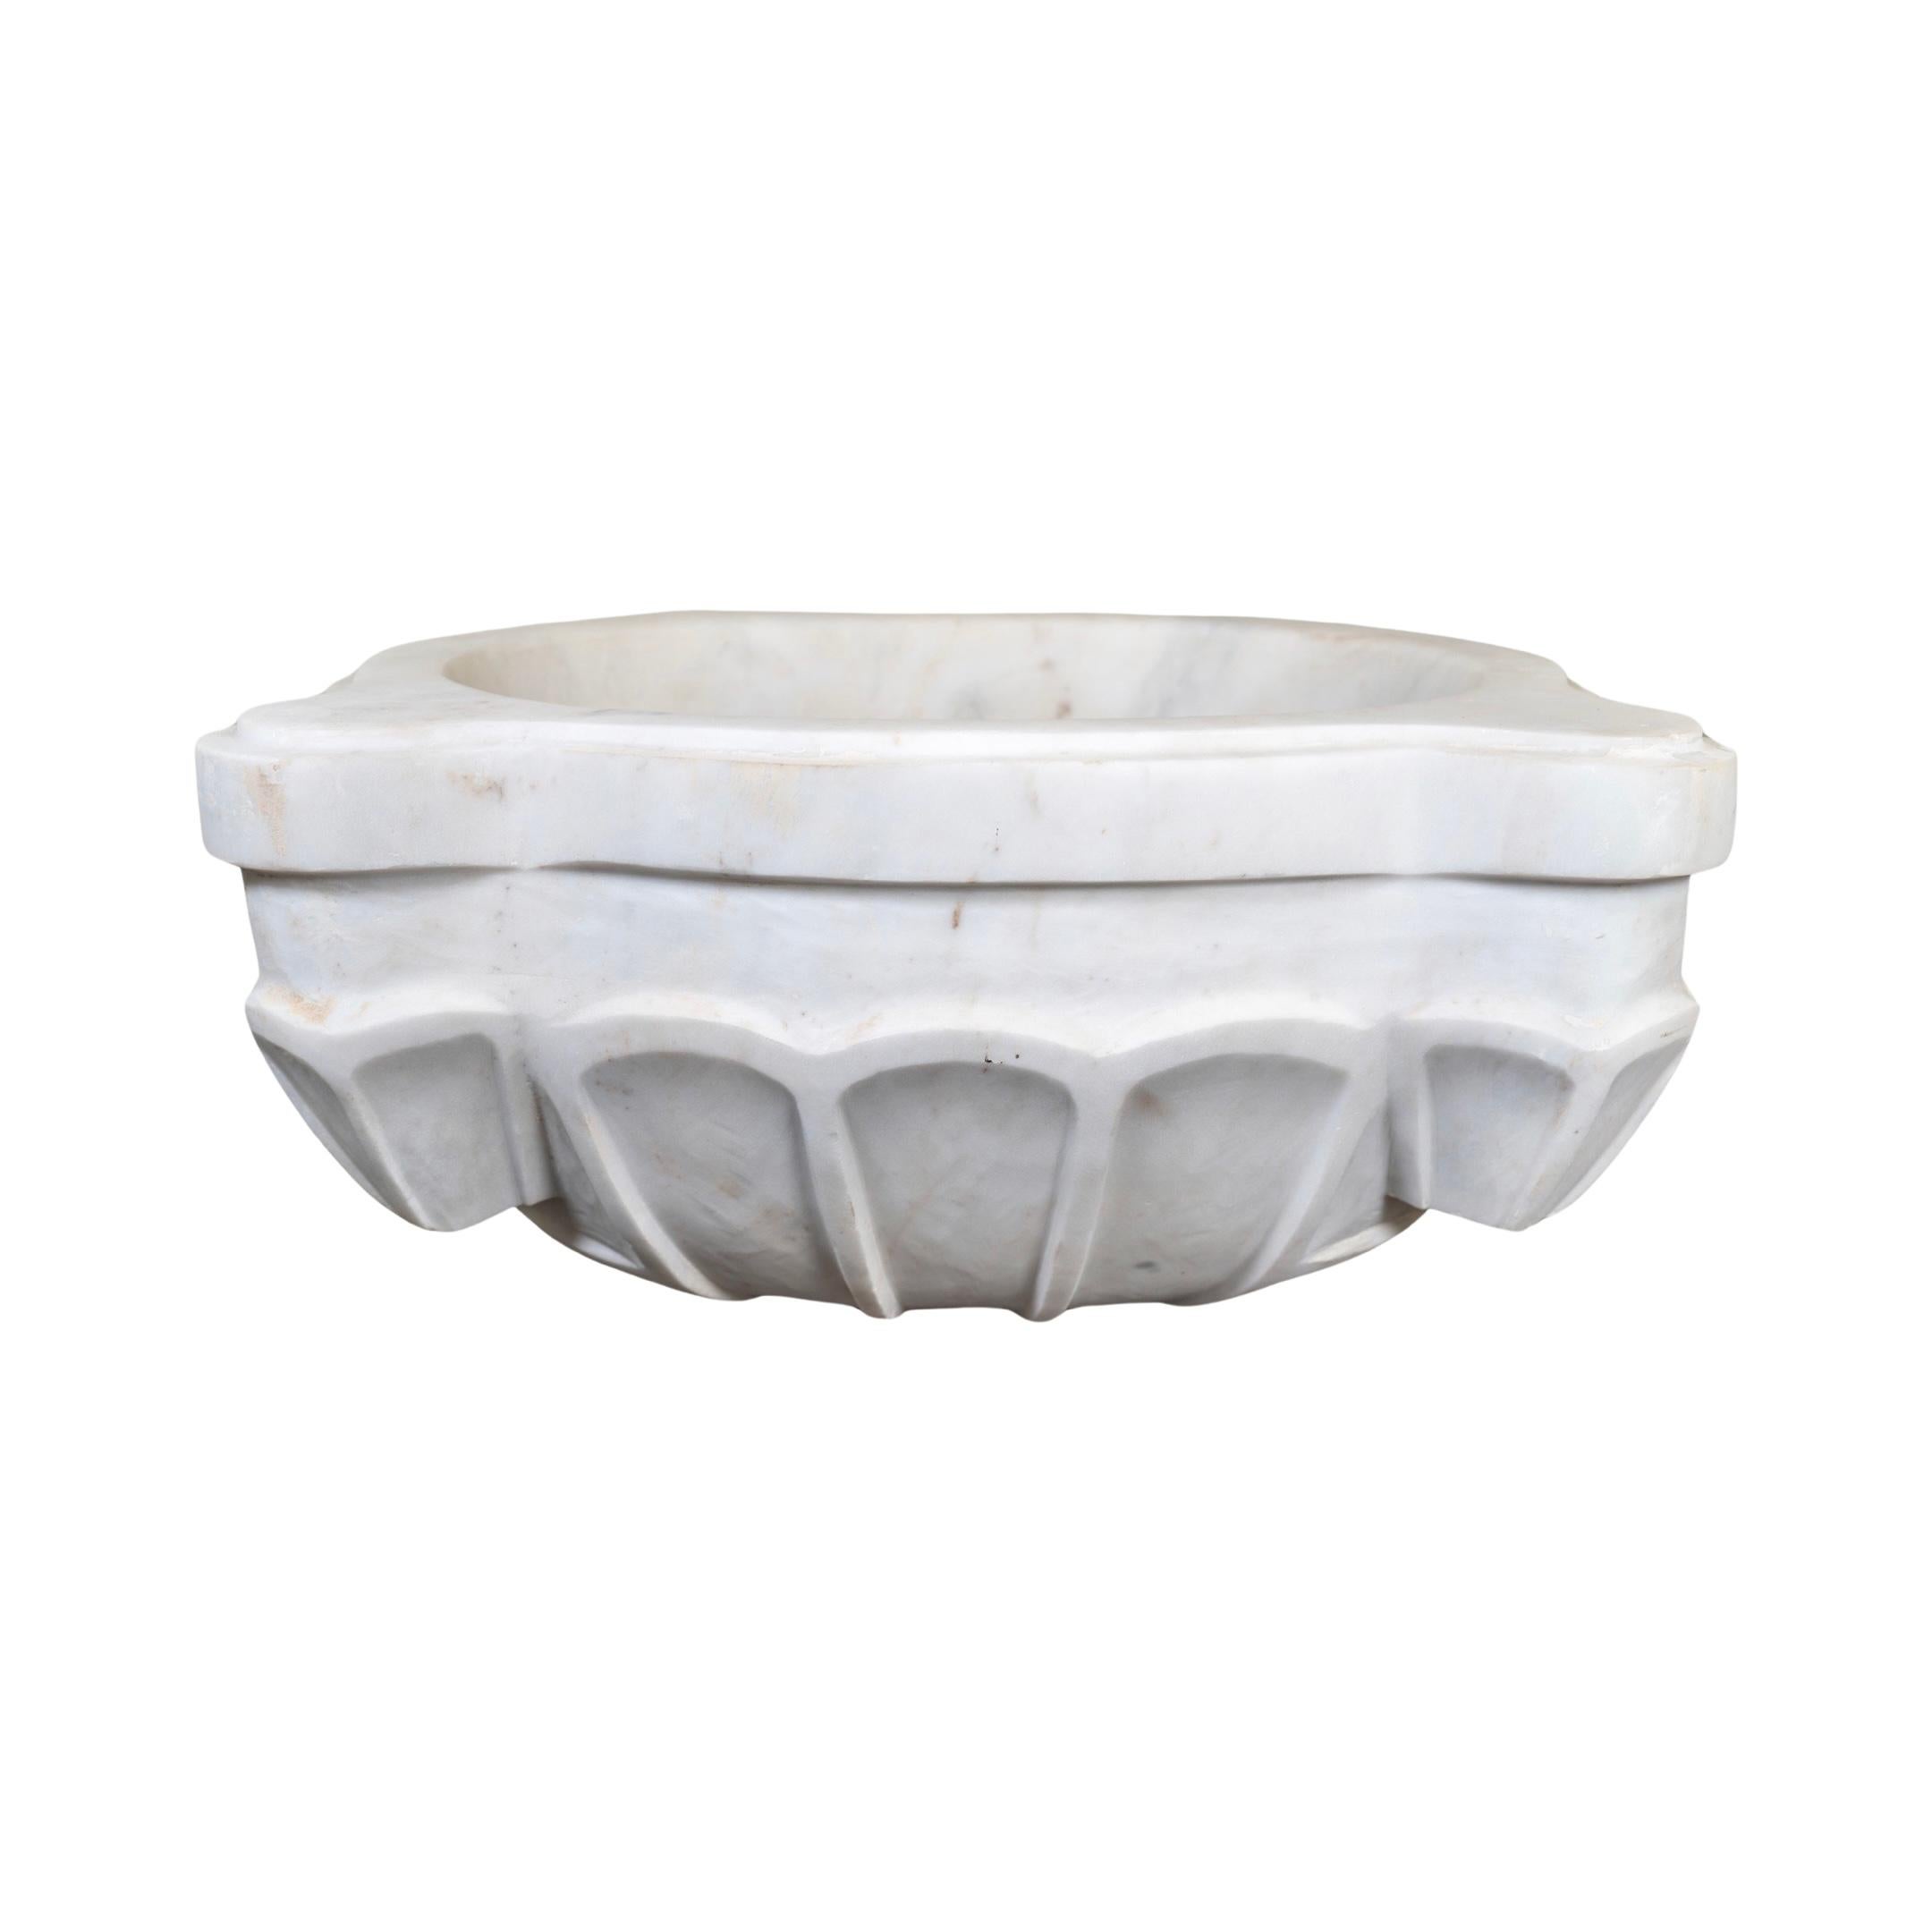 This high-quality French White Marble Sink is an authentic reproduction from the 18th century. It is crafted from luxurious marble and offers superior strength, durability, and aesthetic appeal. Its timeless design and superior material make it an